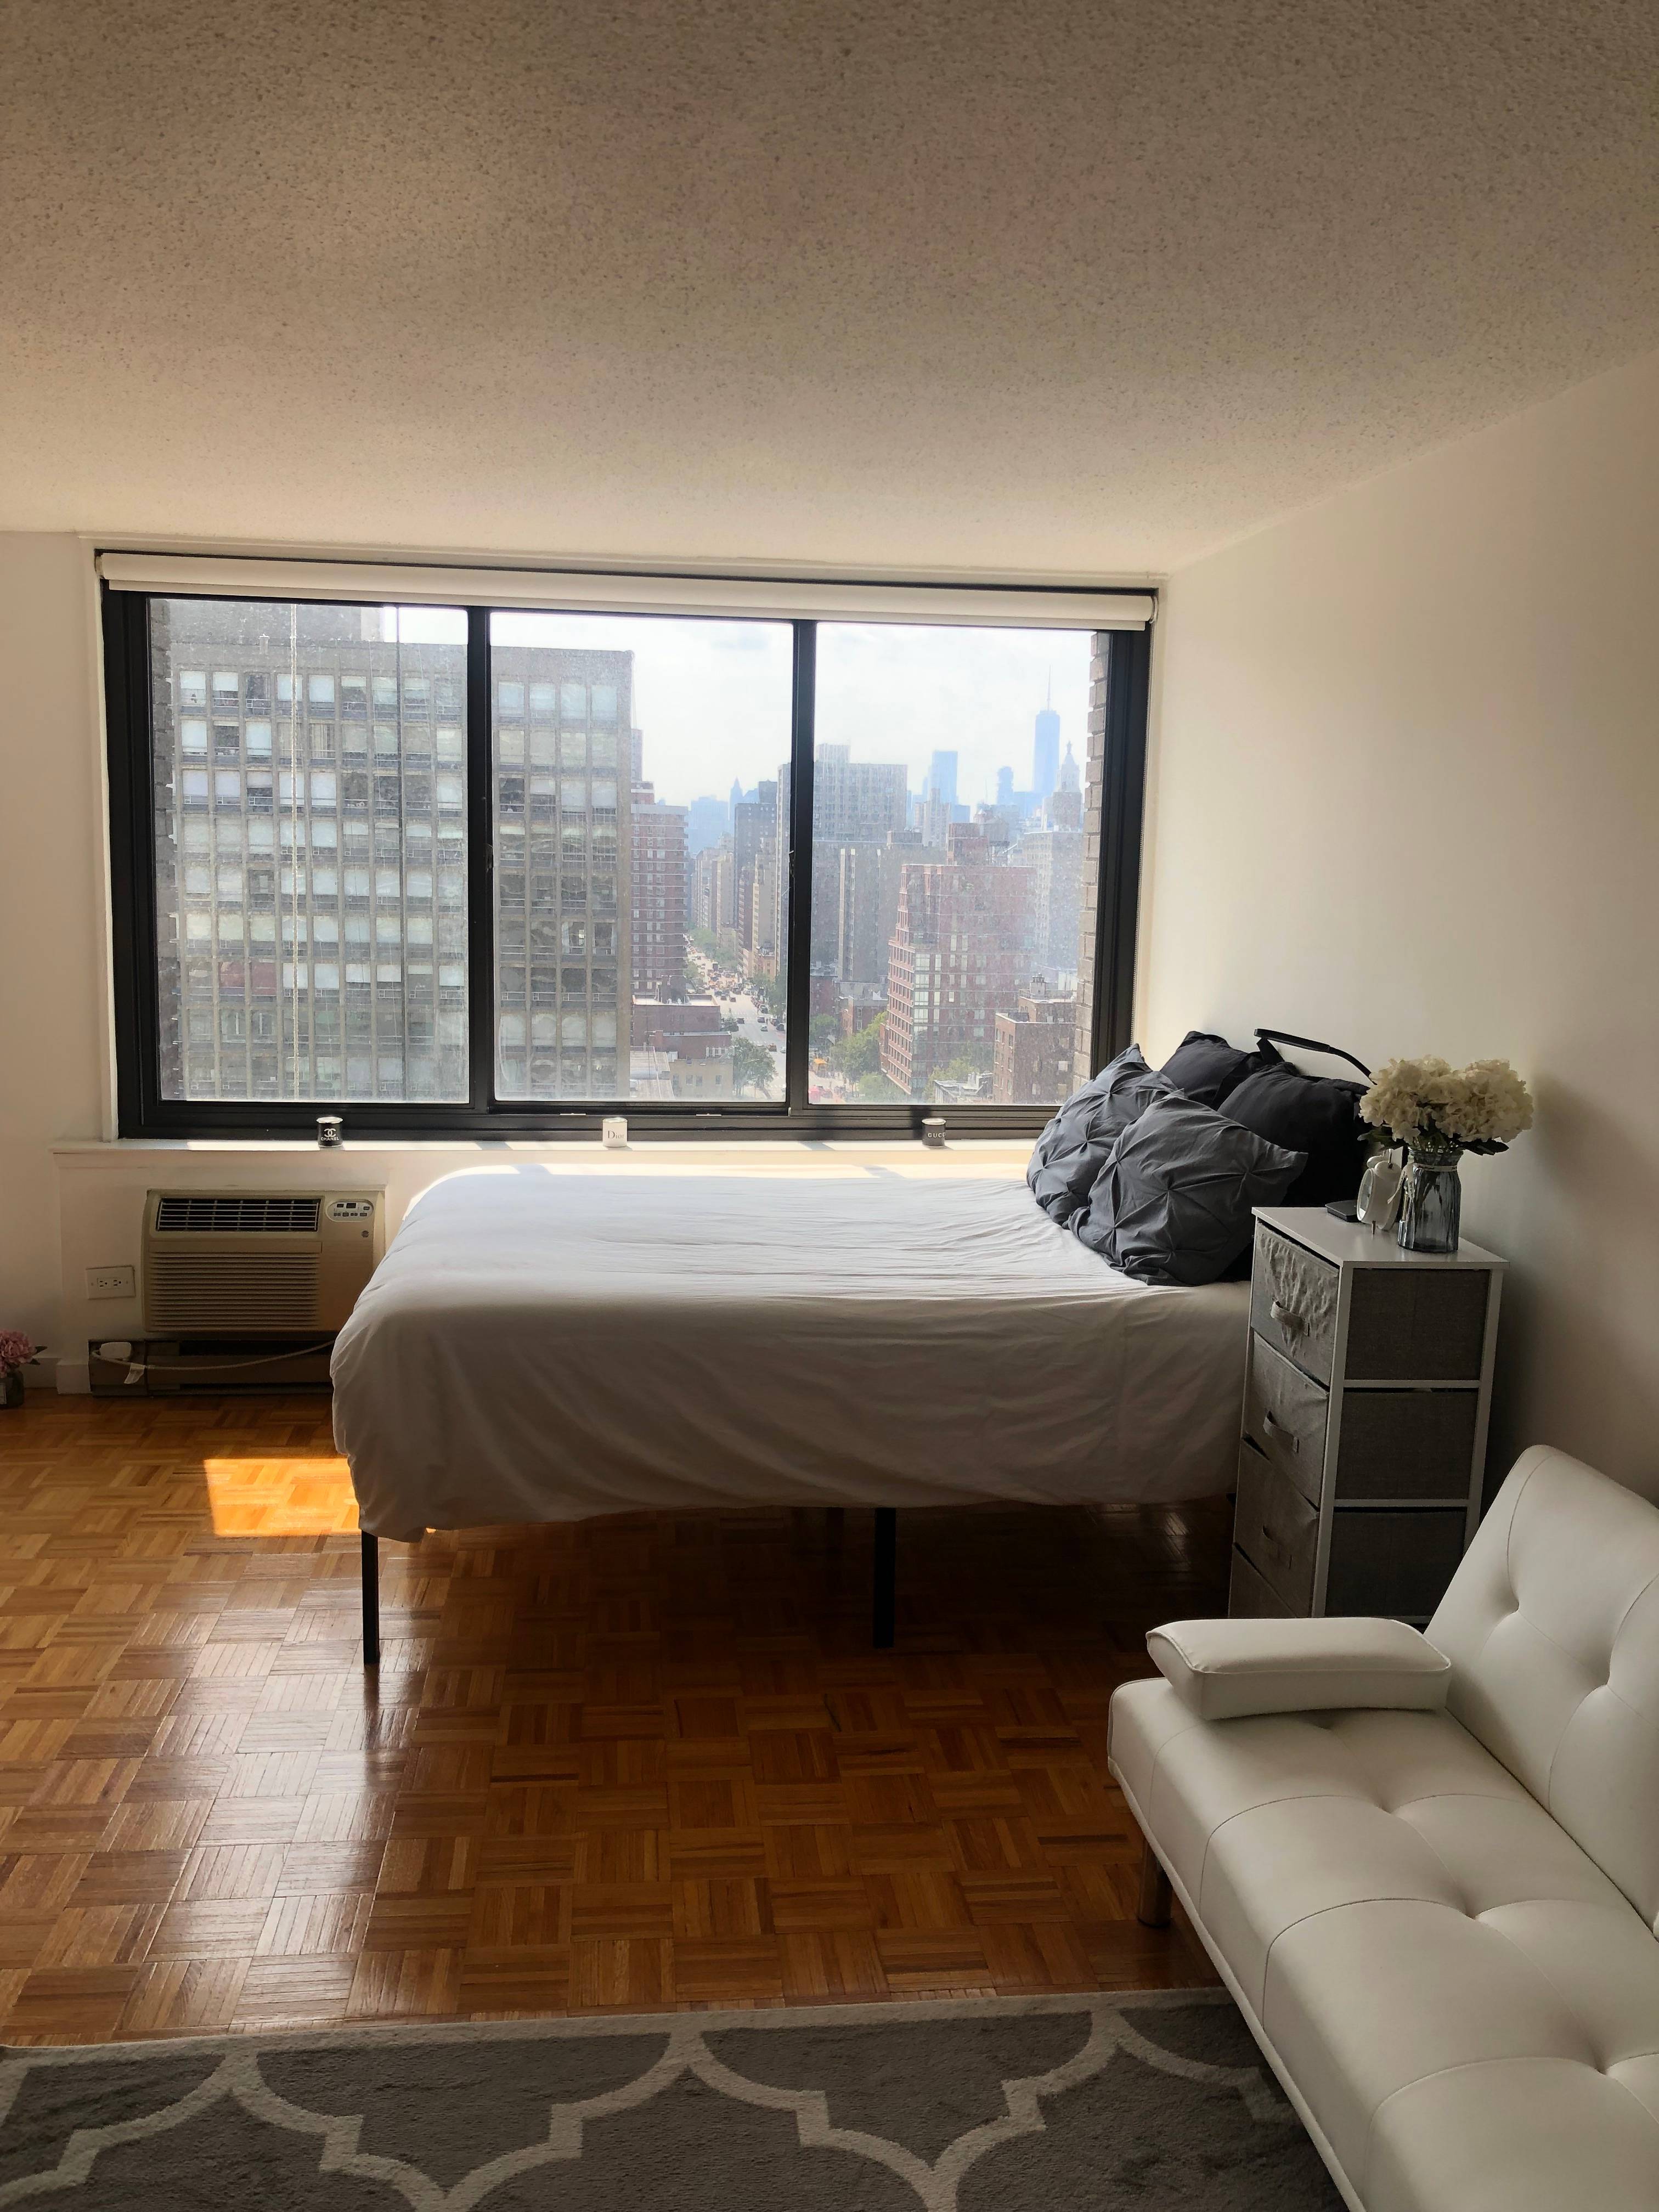 Short Term Rental- June 1st- June 30th. Large Furnished Studio in Midtown- Amazing Location and Views